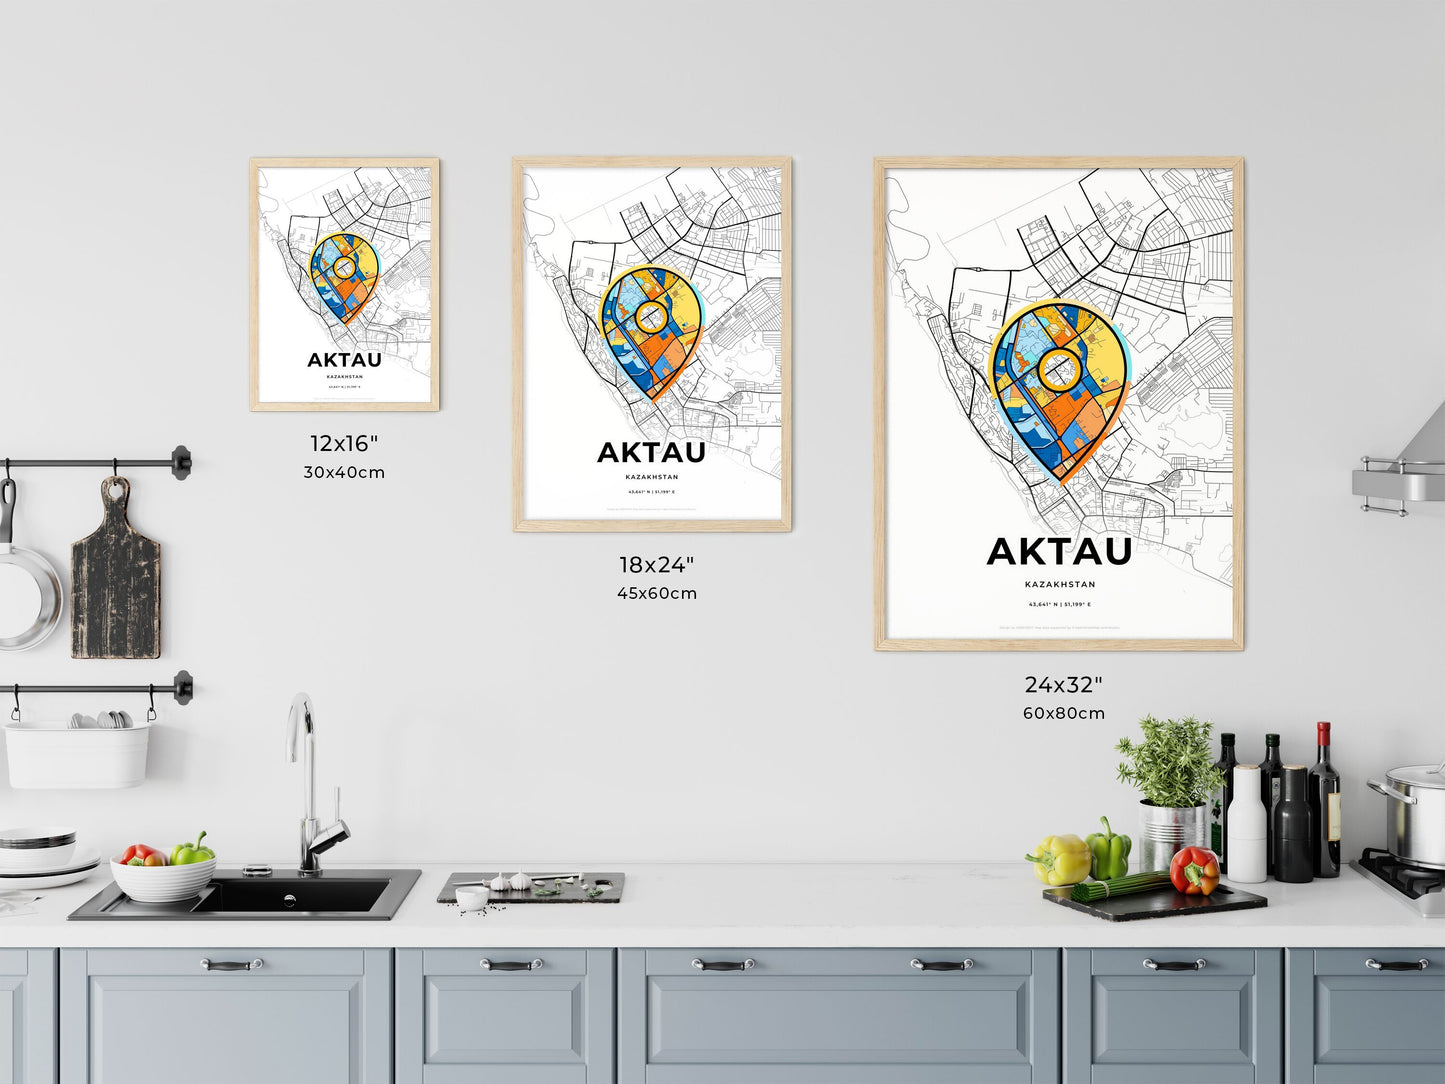 AKTAU KAZAKHSTAN minimal art map with a colorful icon. Where it all began, Couple map gift.